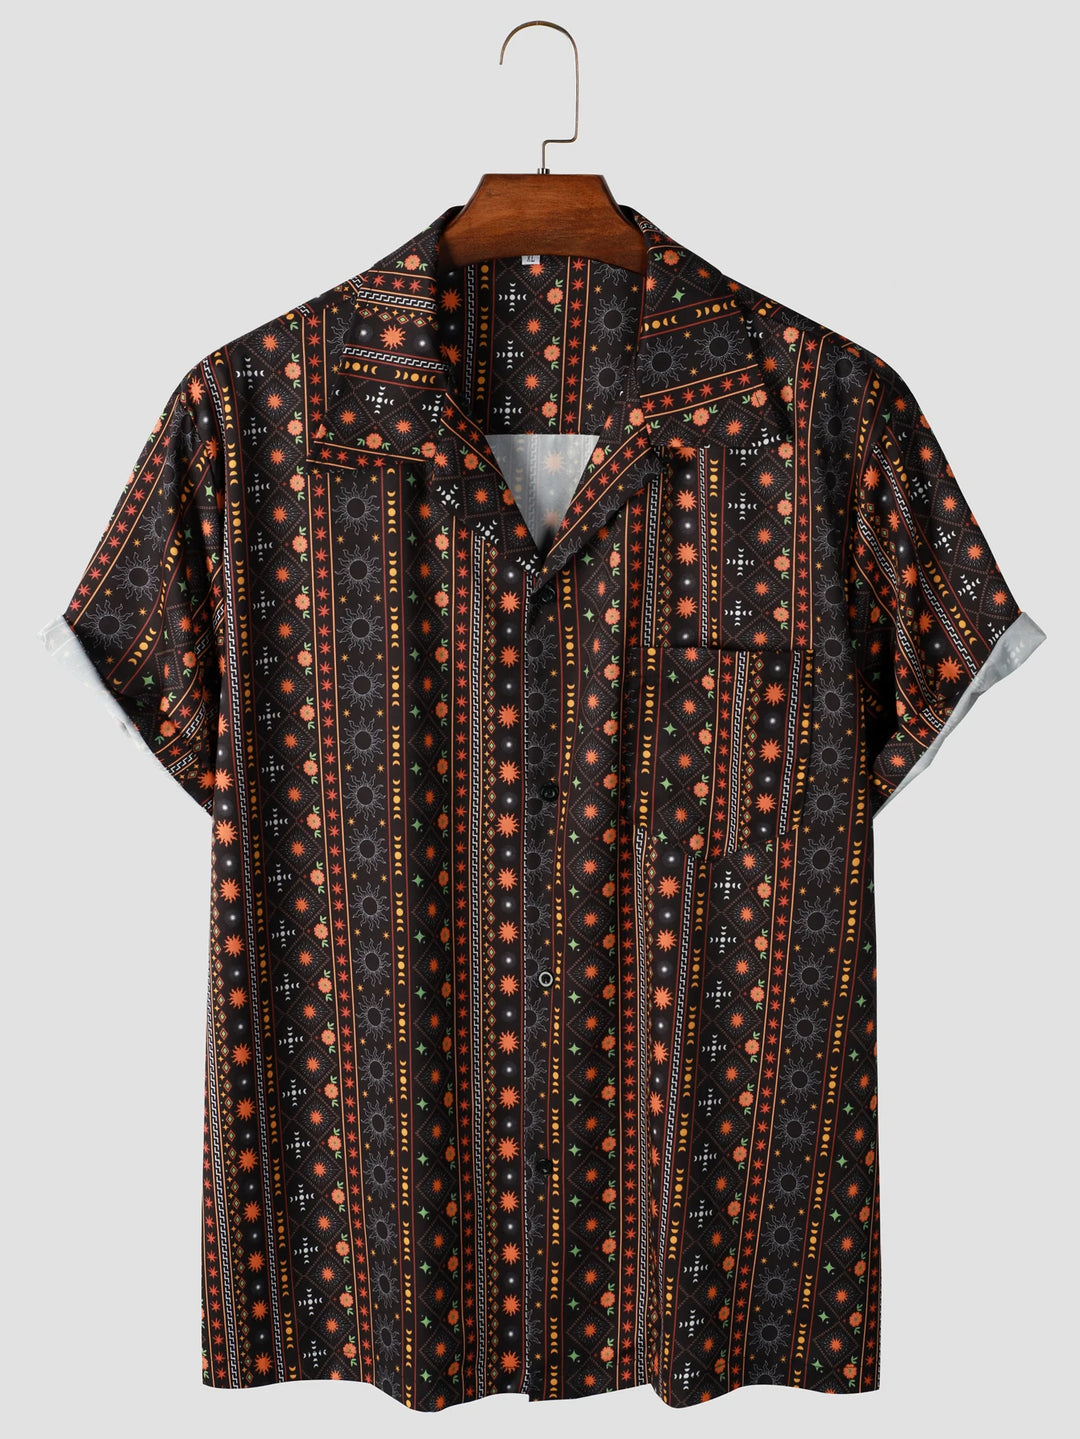 Calvin Summer Shirt in Patterned Cotton